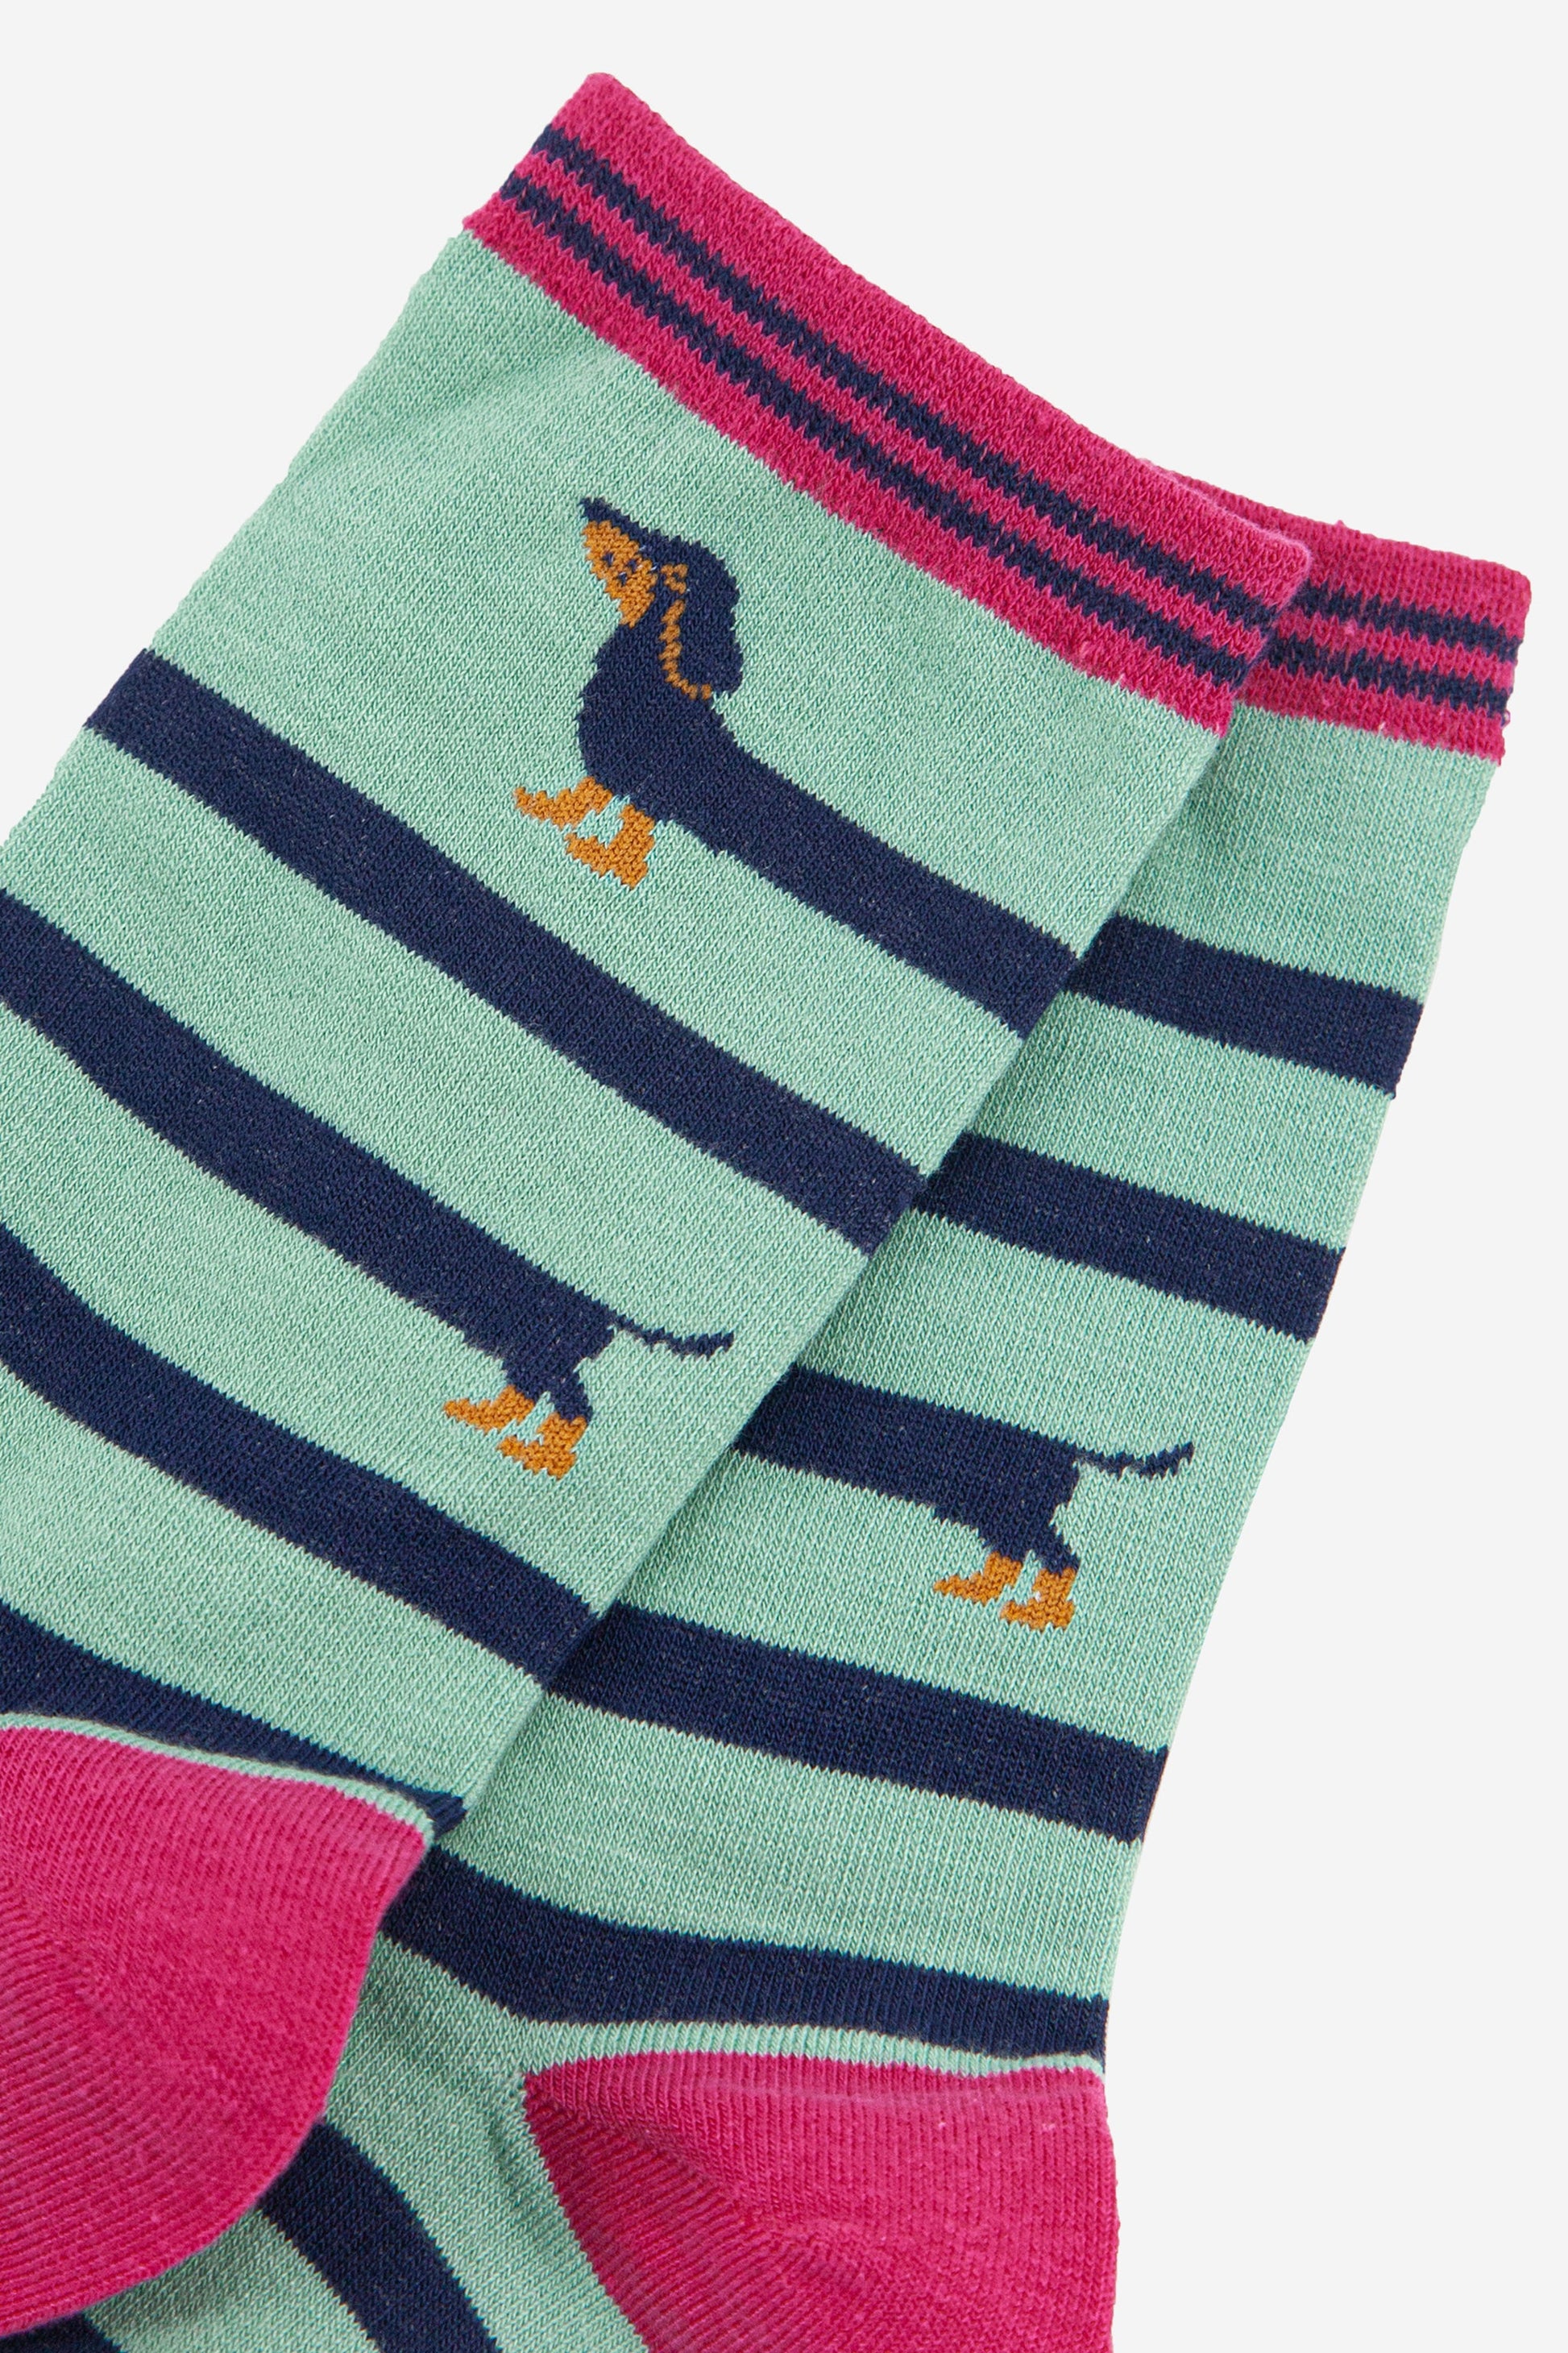 close up of the fun winding sausage dog pattern showing the head and tail of the sausage dog with its elongated body winding around the socks